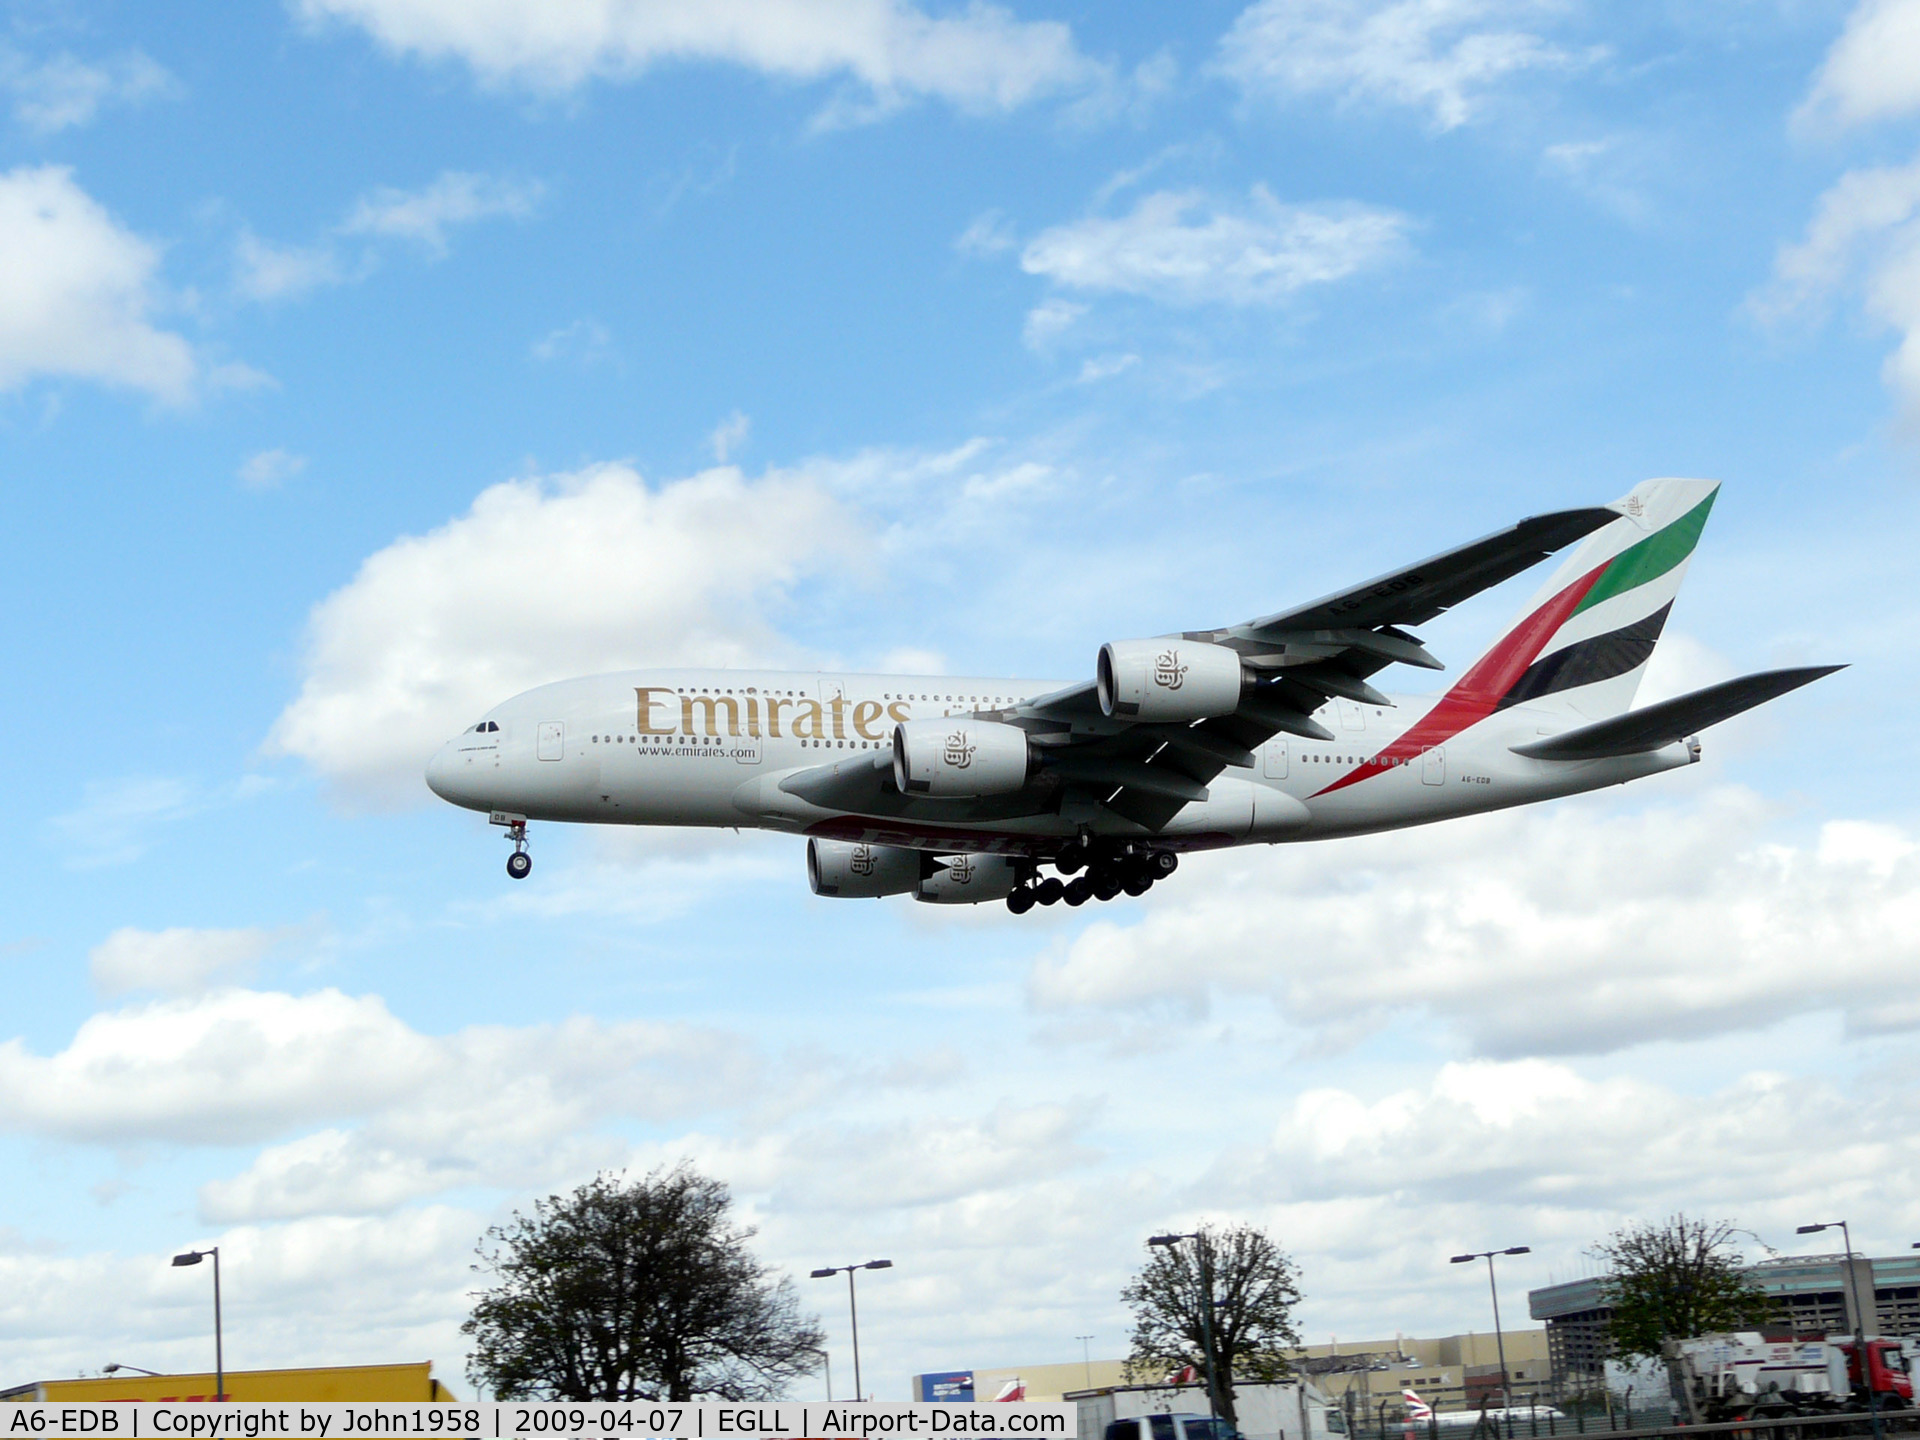 A6-EDB, 2008 Airbus A380-861 C/N 013, About to land on 27L